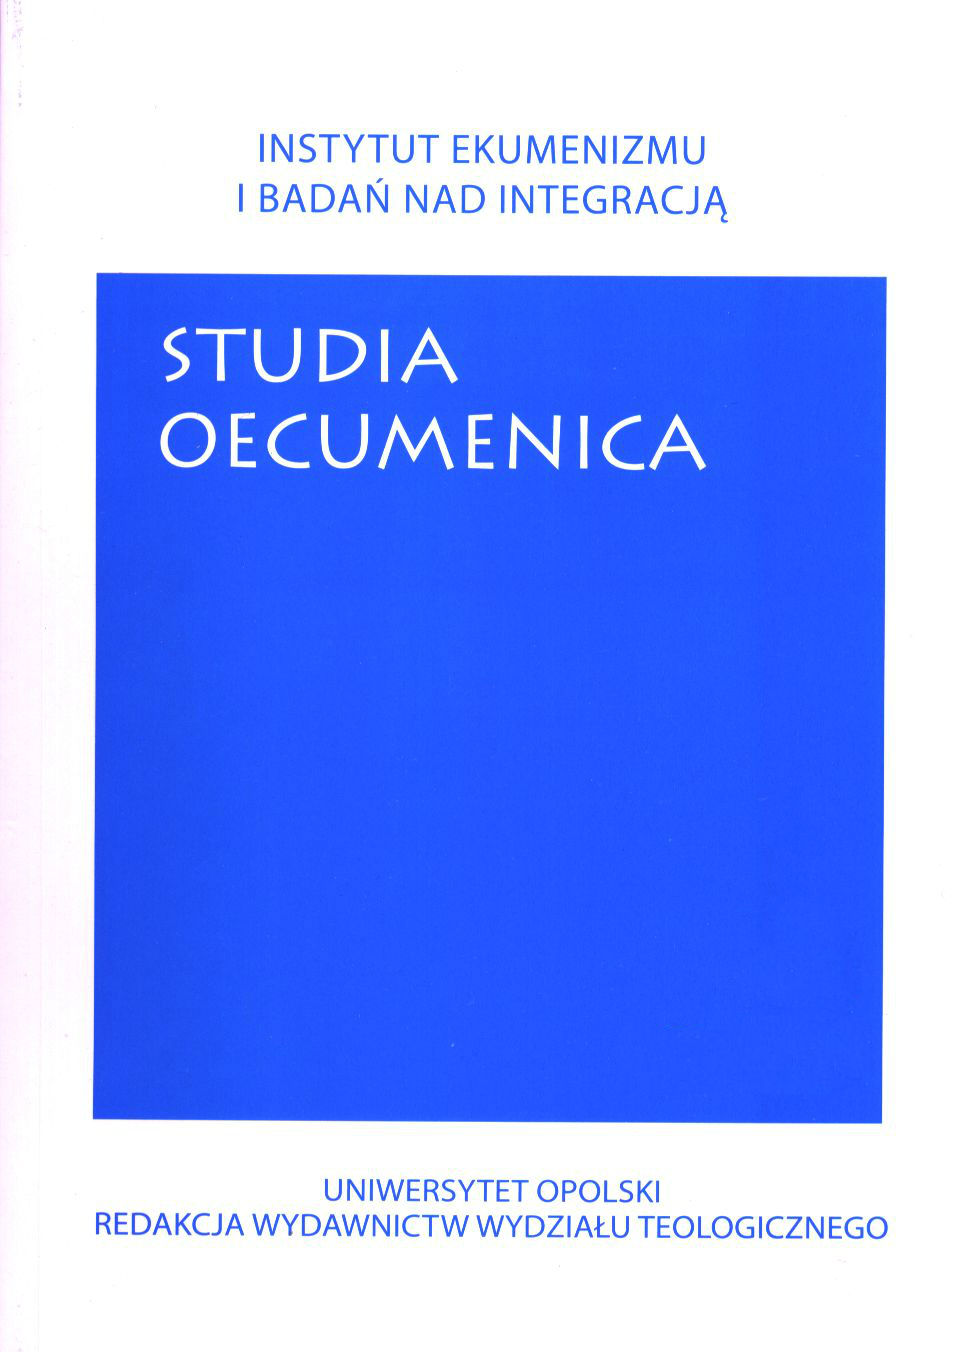 The Contemporary Sacral Architecture of the Christianity as an Environment of an Ecumenical Unity of Faith Cover Image